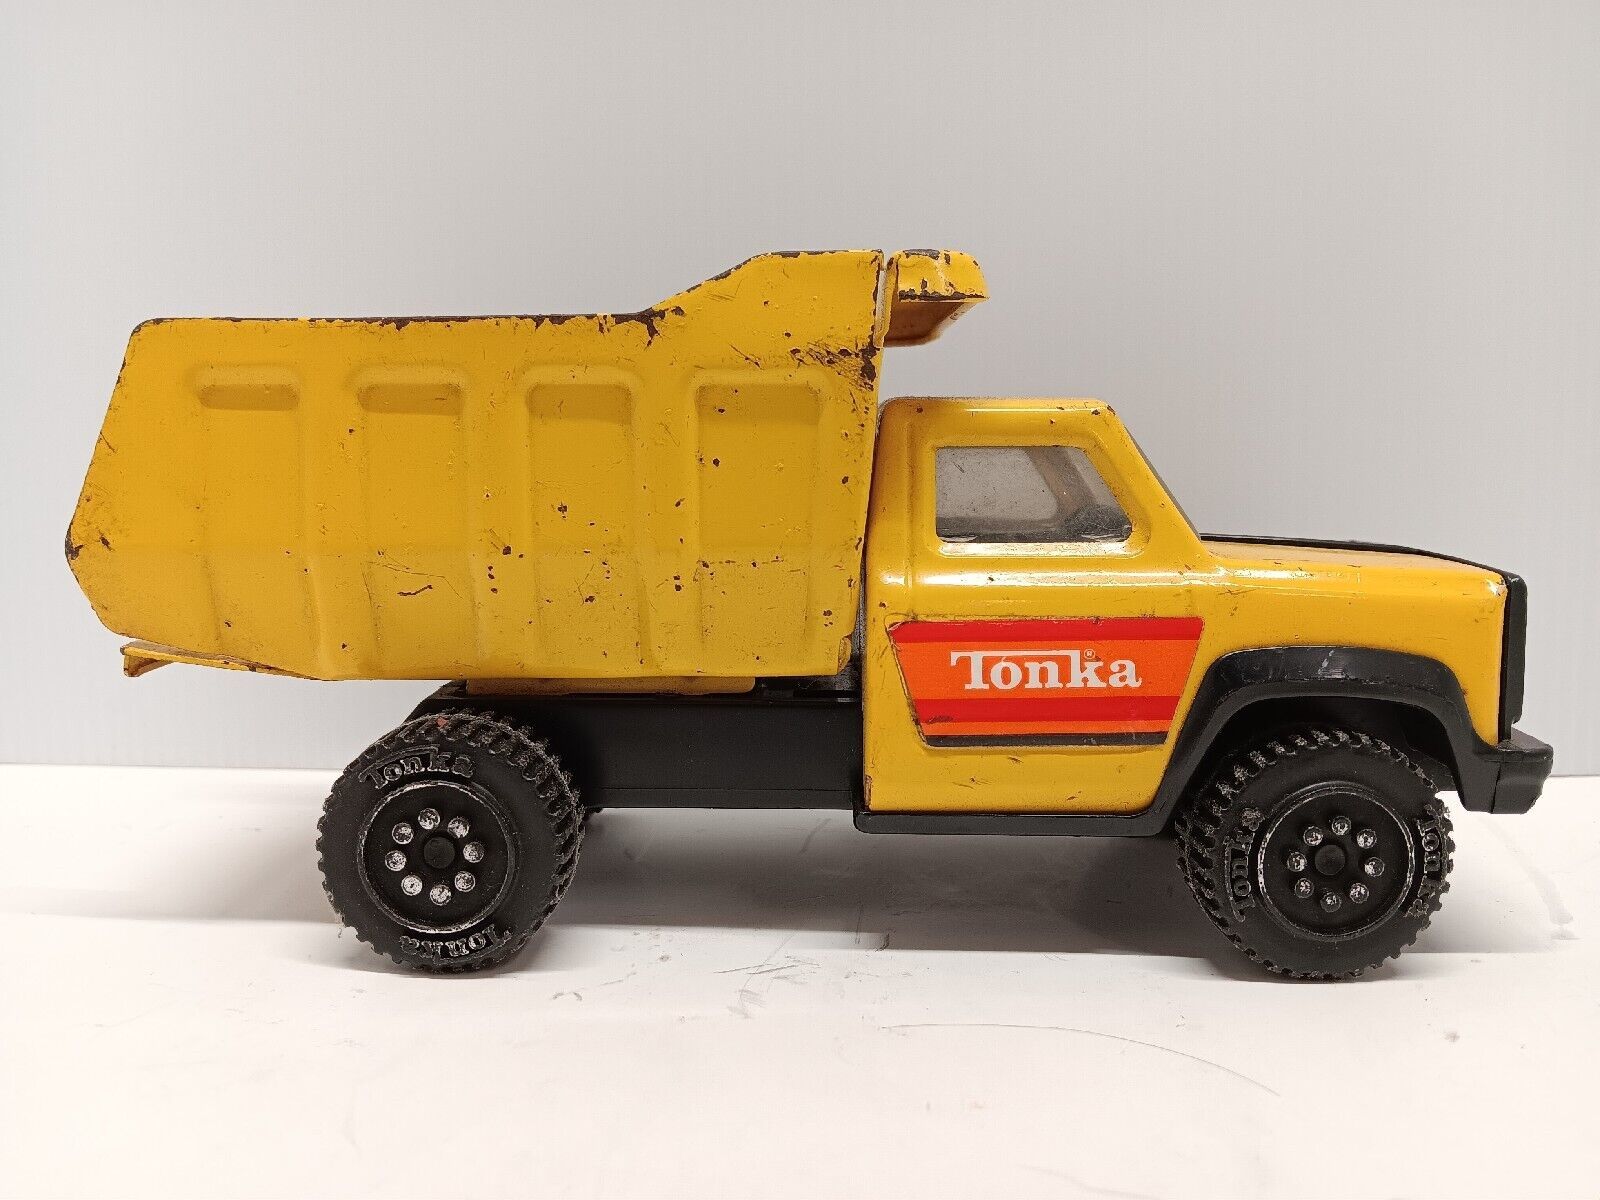 Vintage Tonka Yellow Dump Truck 1960's Made In USA Metal FREE SHIPPING - $37.39